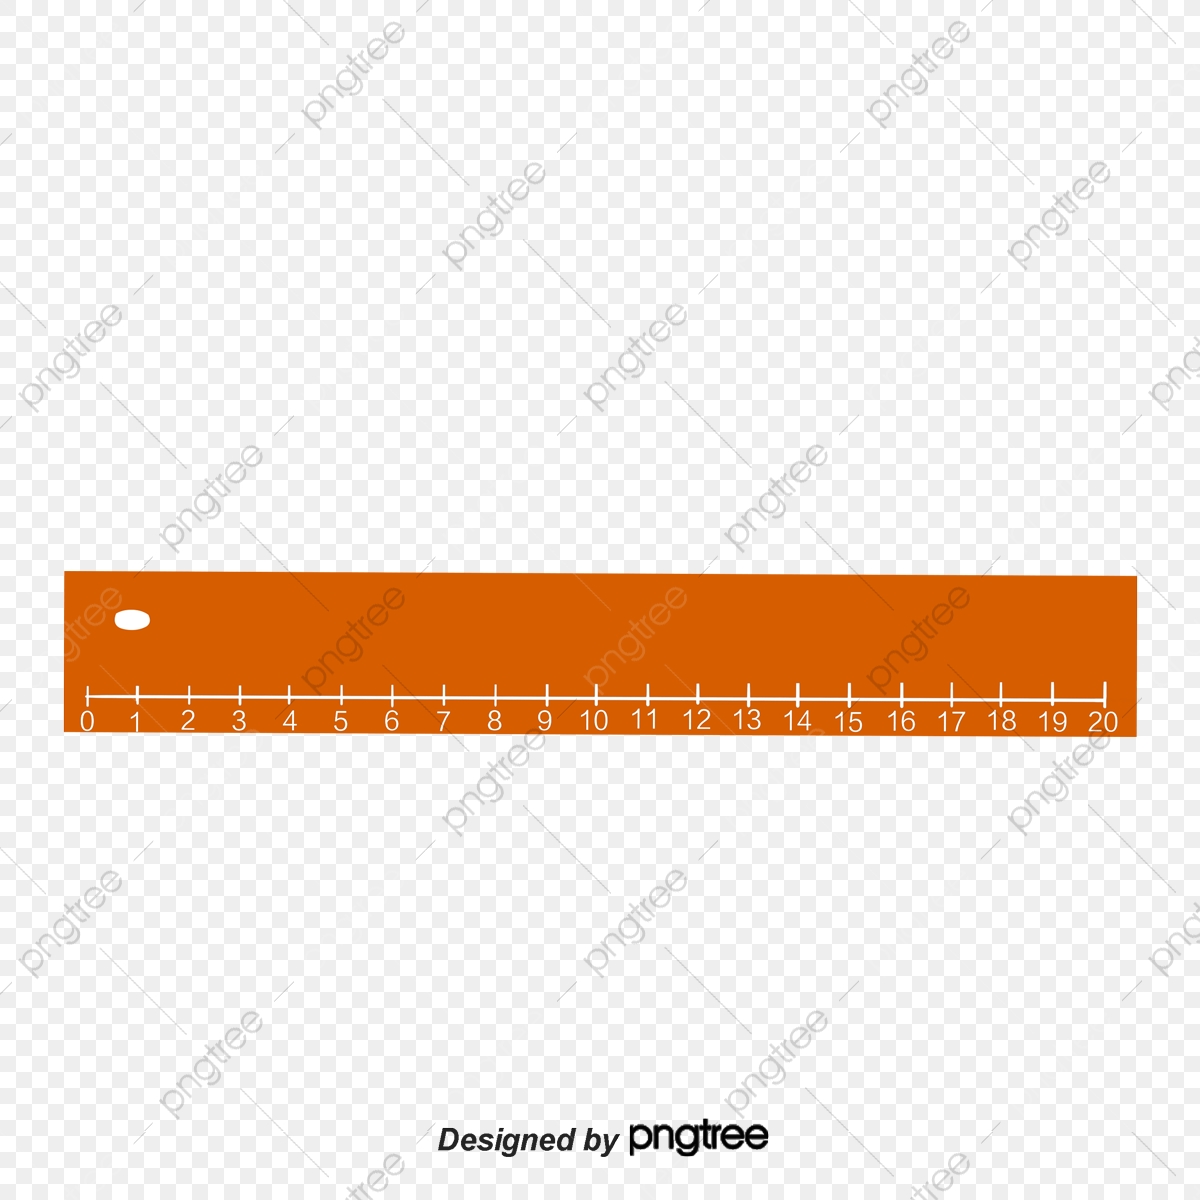 Download Ruler Vector Image at Vectorified.com | Collection of ...